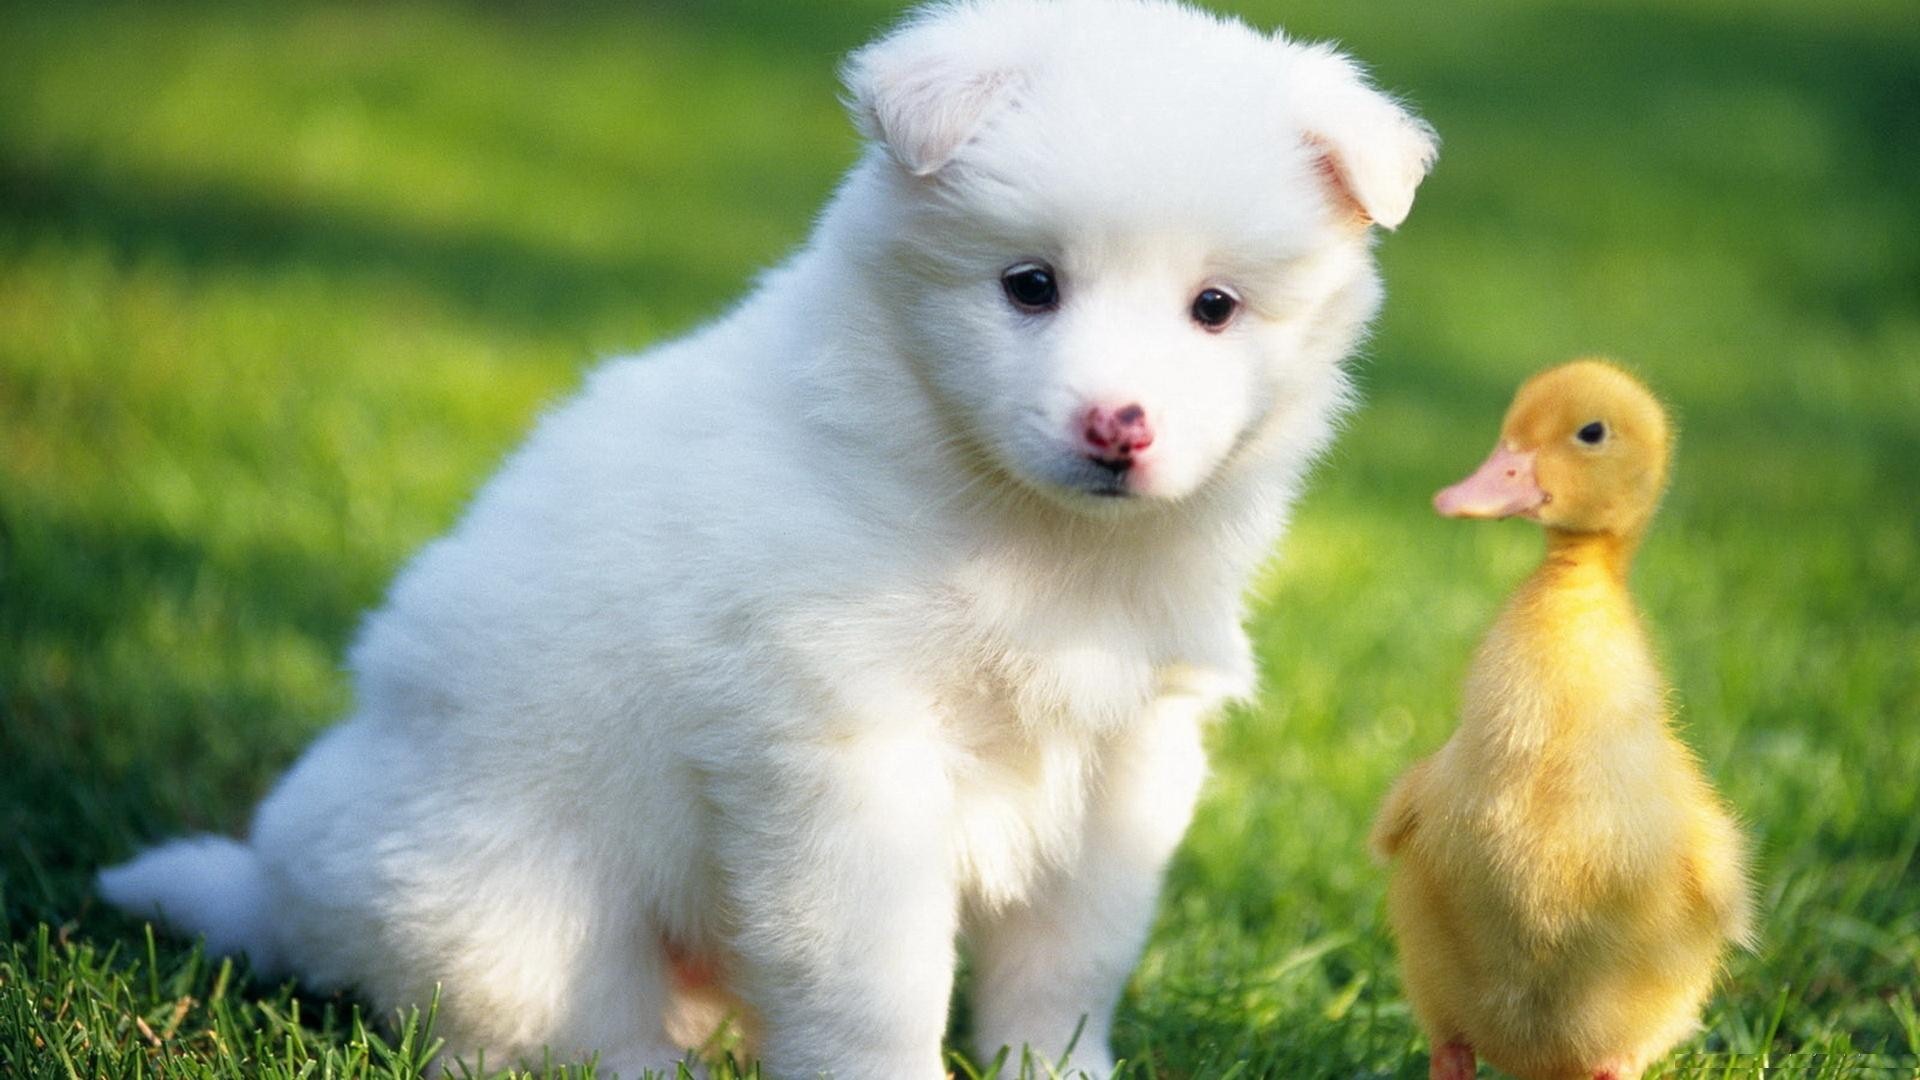 Wallpaper Name  Baby Duck With White Puppy HD Cute Animals Wallpaper